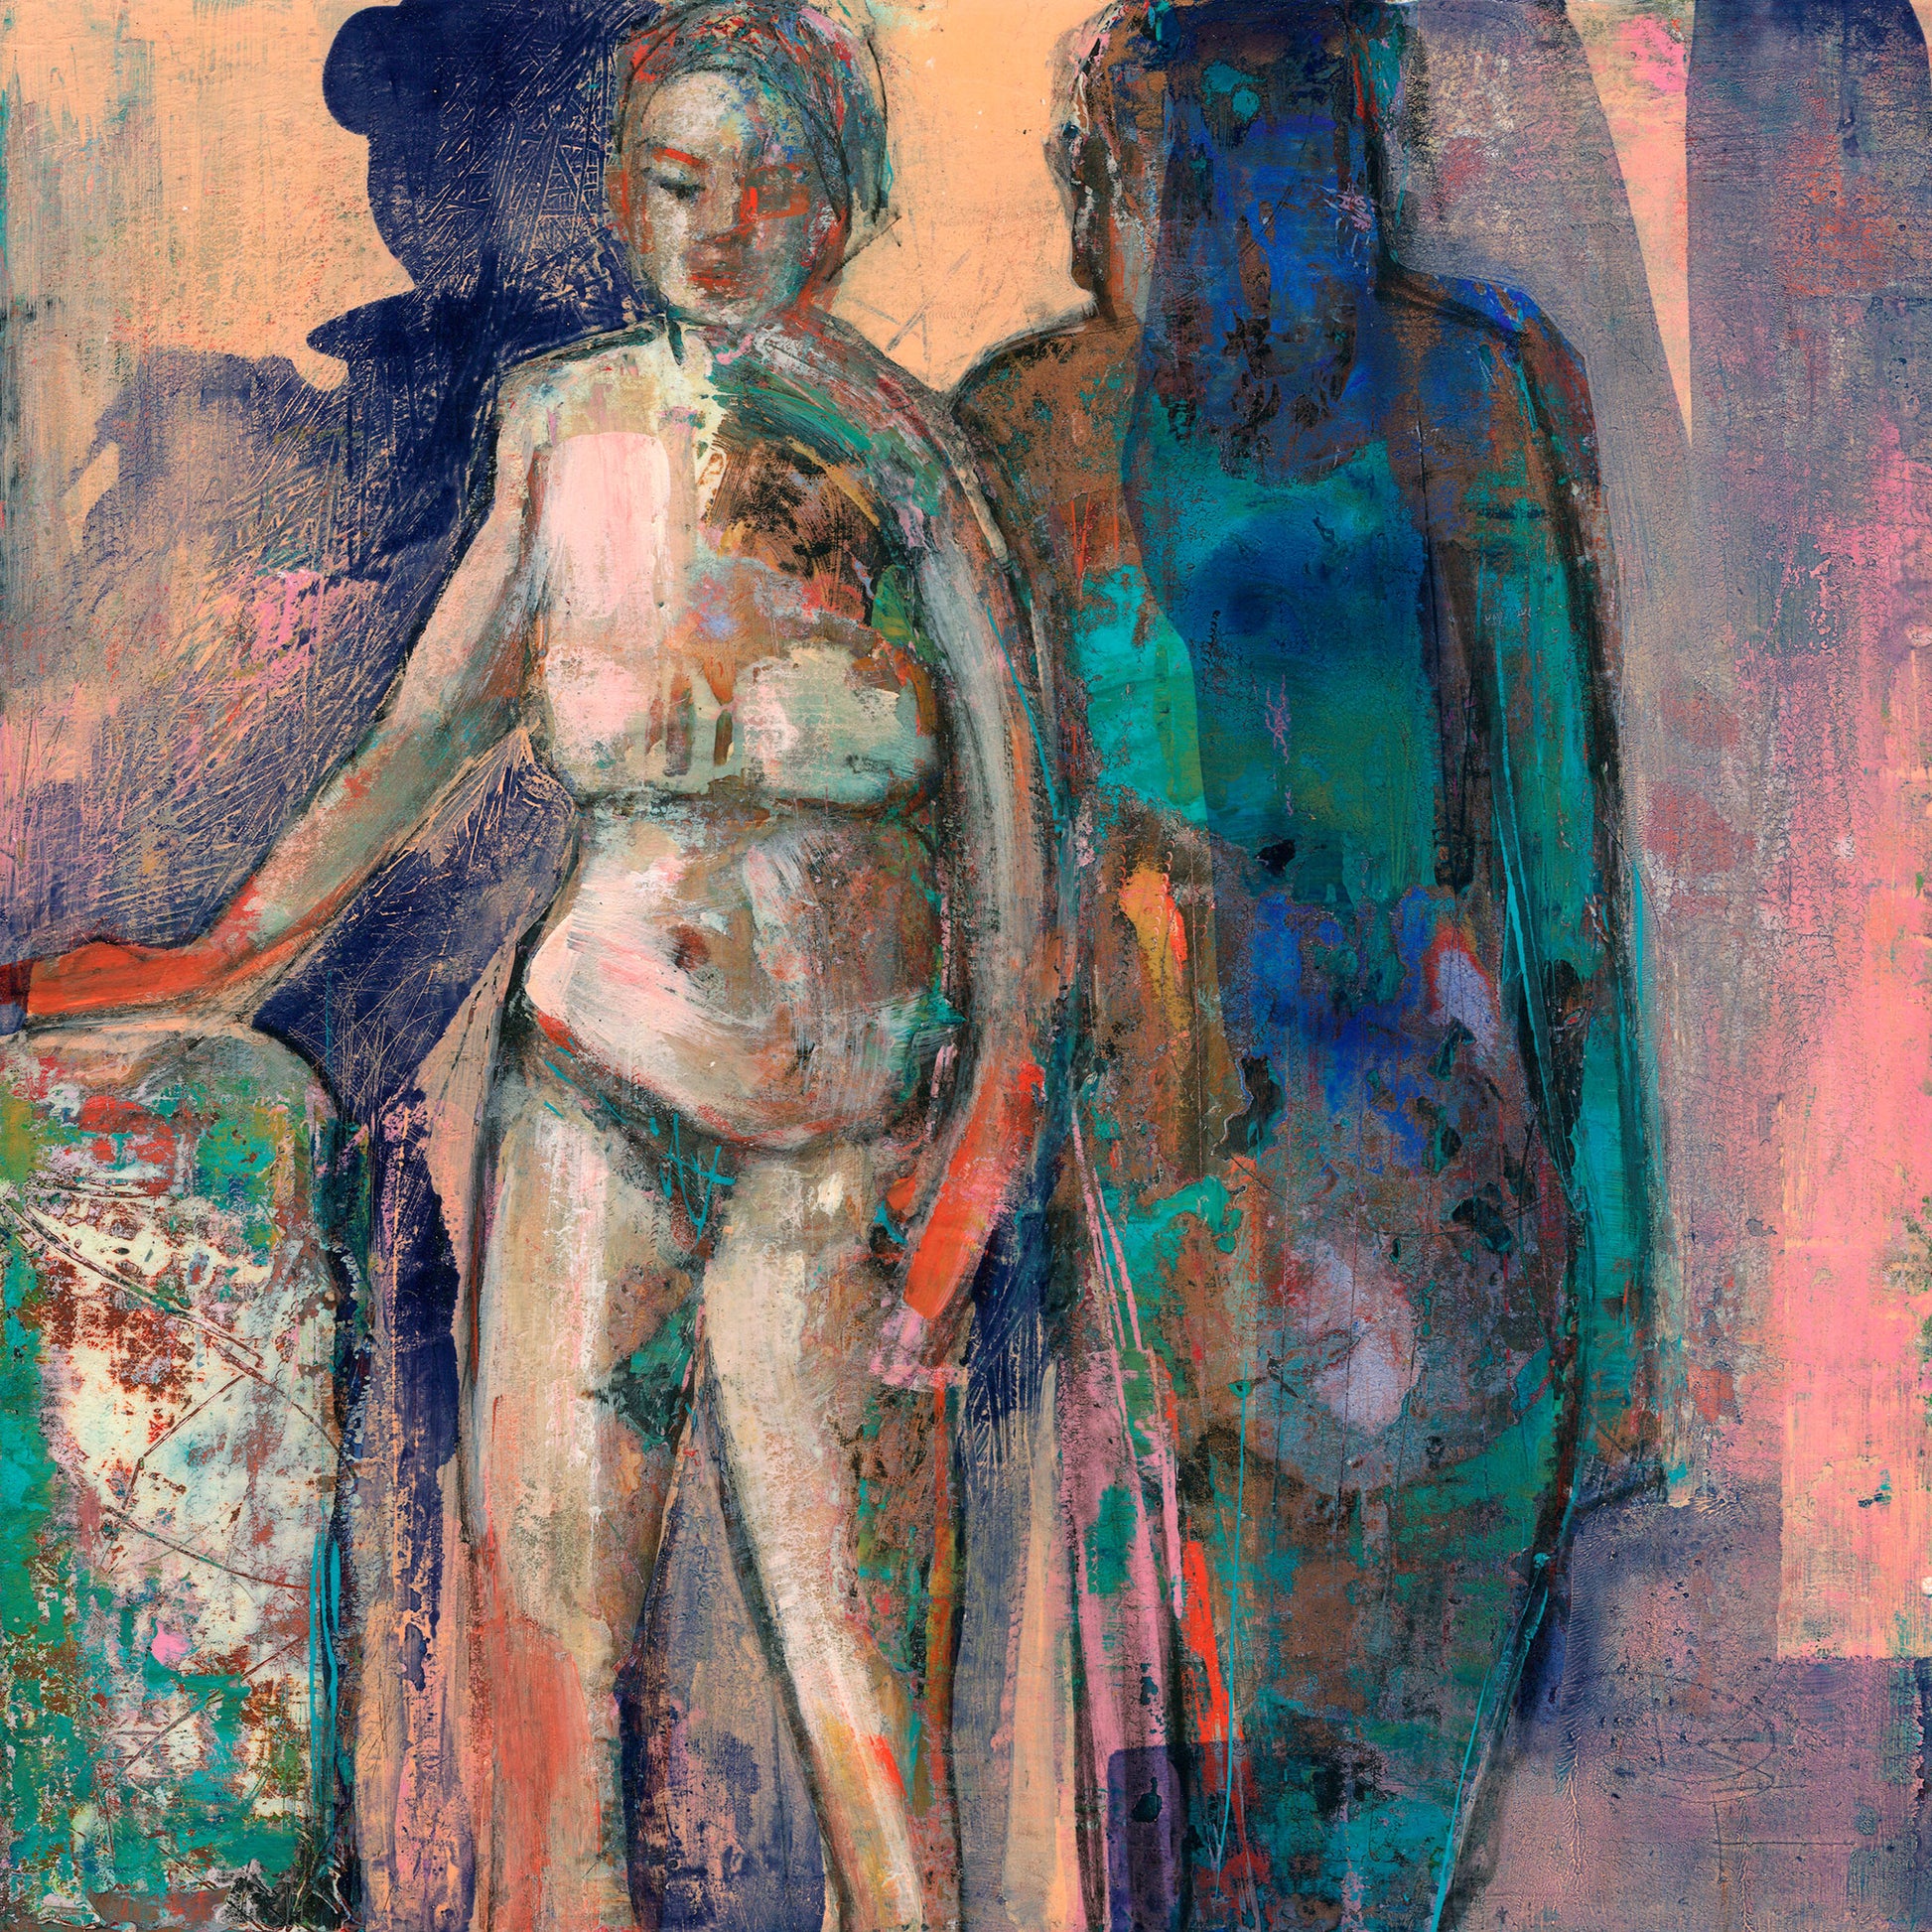 Acrylic painting of a standing female nude with one hand resting on a pedestal, depicted in a semi-abstract style.The colors are a blend of pink, blue, and aqua green, creating a textural mixture. There are two dark blue shadows: one is full length to the right of the figure, and the other is to the left behind her head.